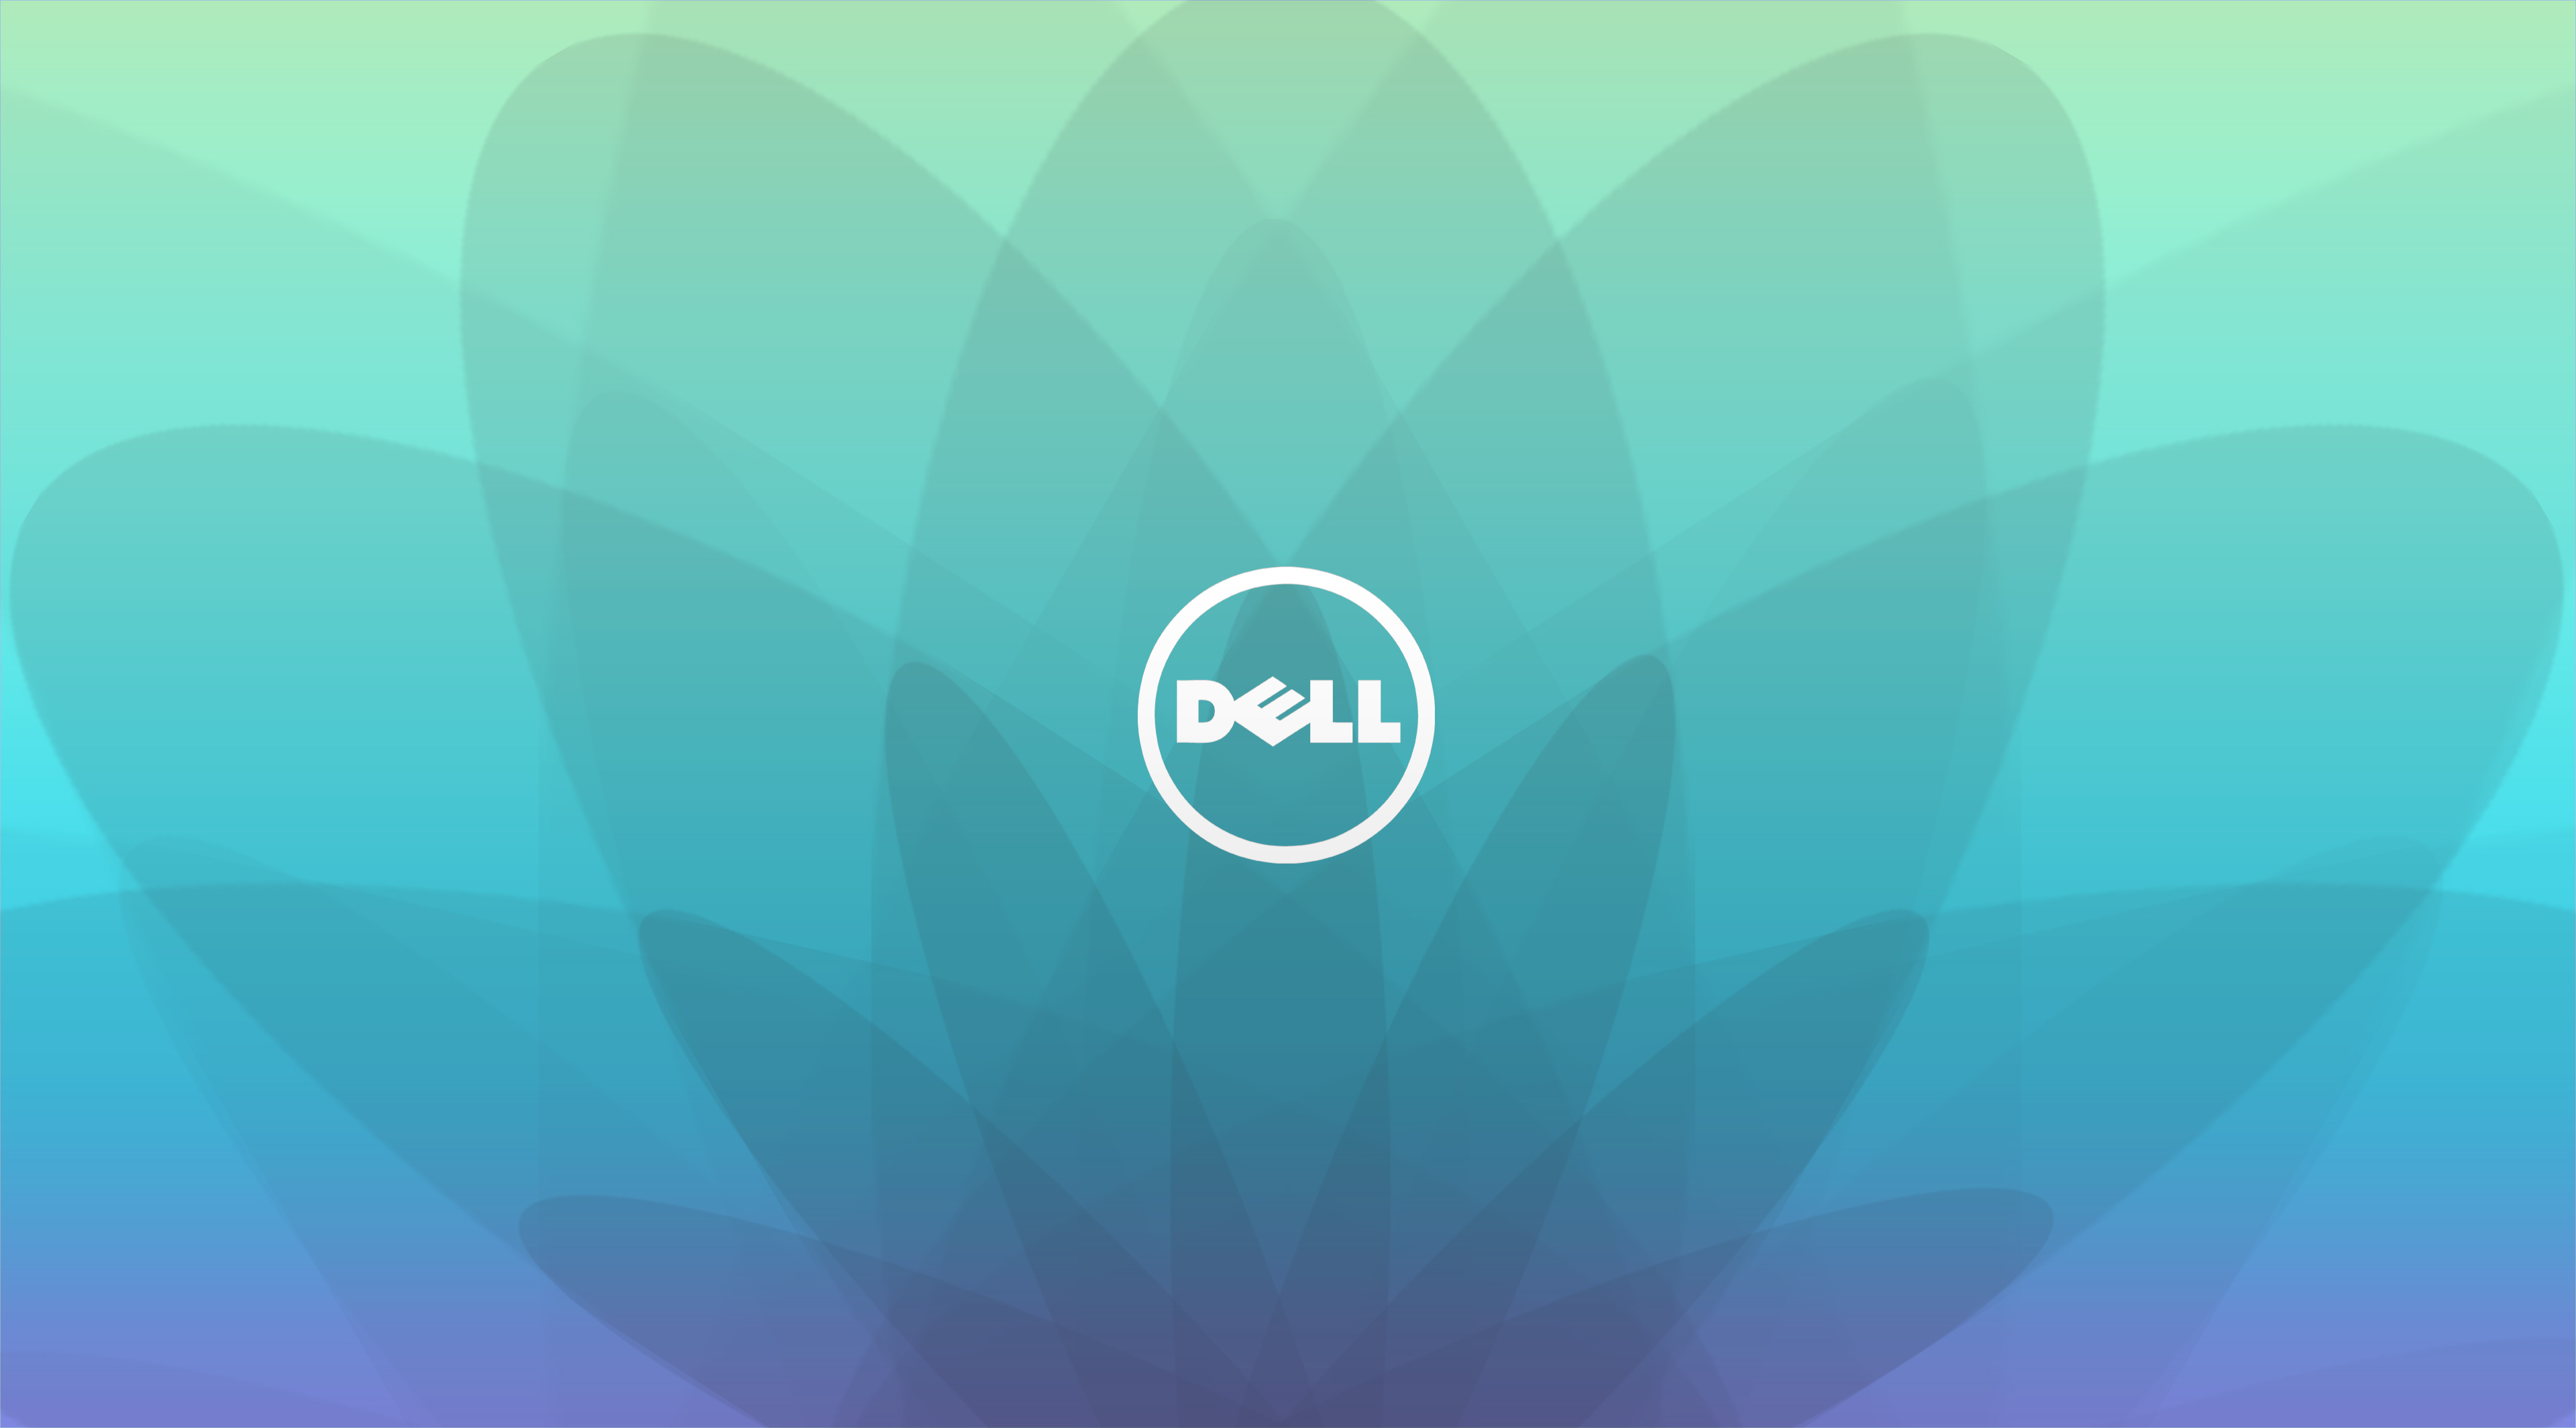 Dell Wallpapers 08 3840 X 2128